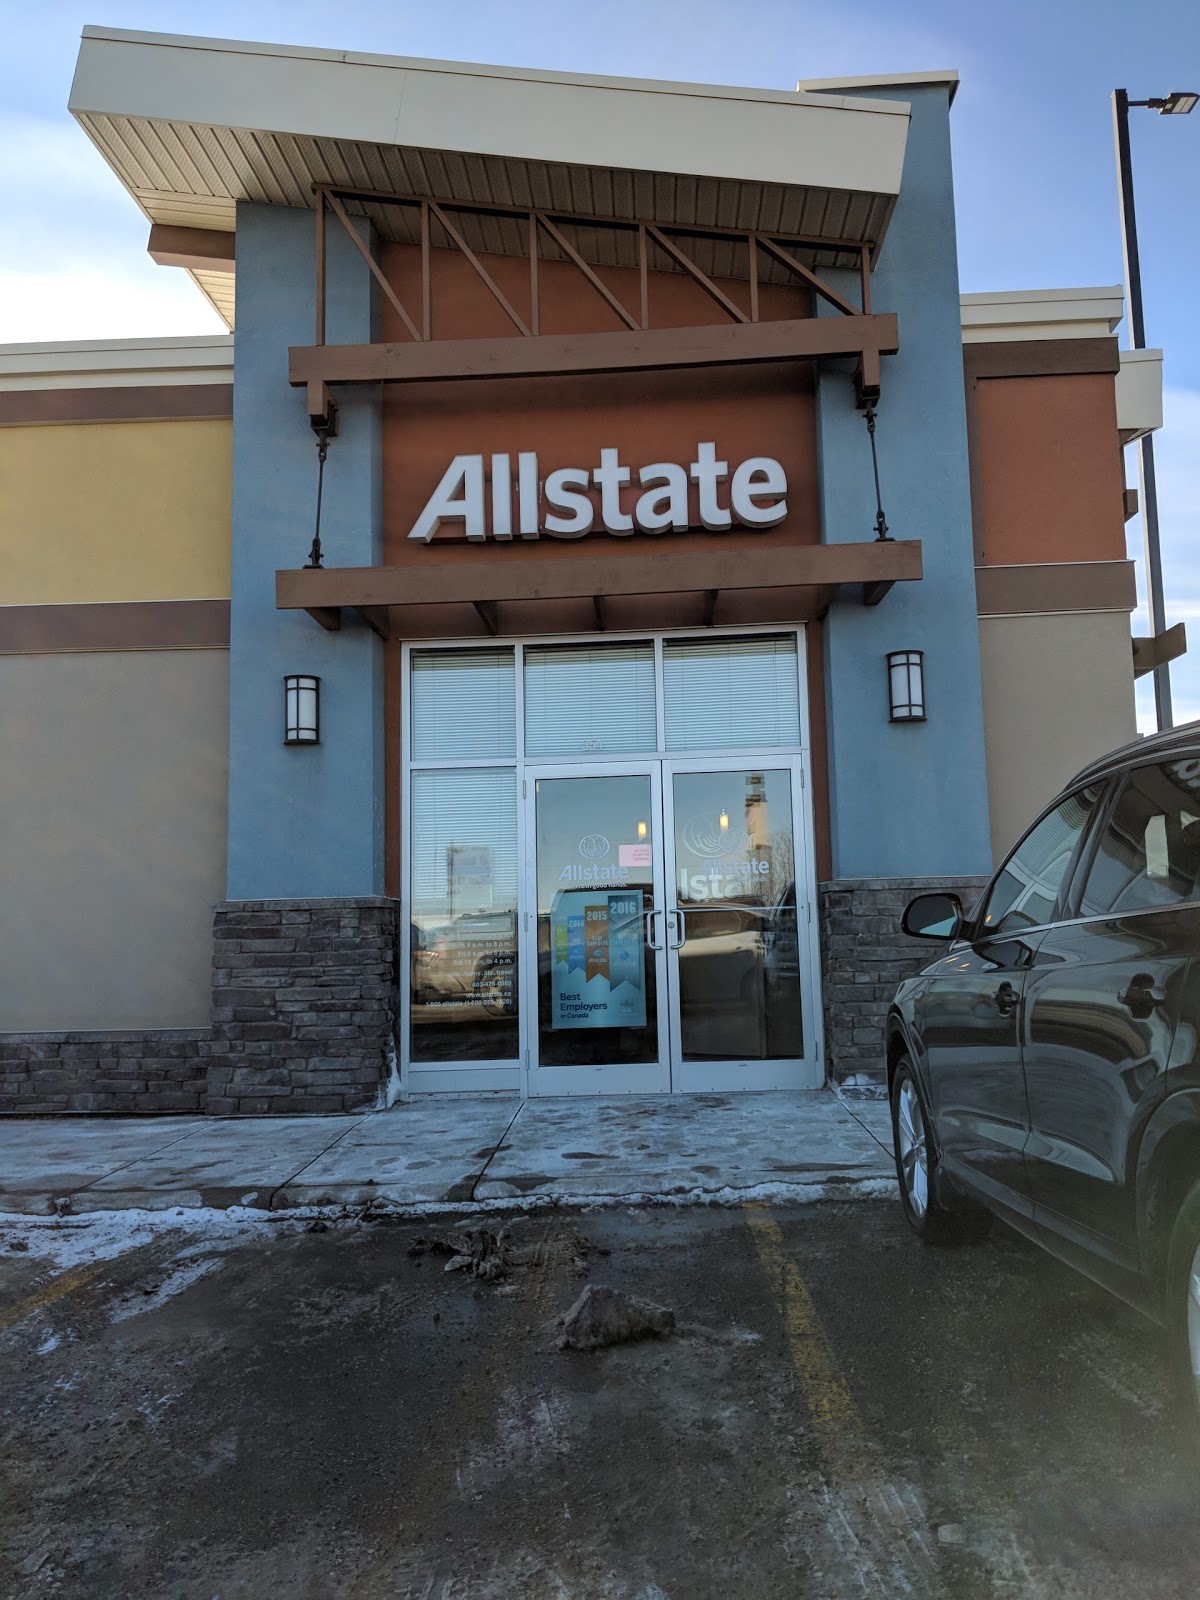 Allstate Insurance: Calgary South Agency (Open Virtually Only) reviews